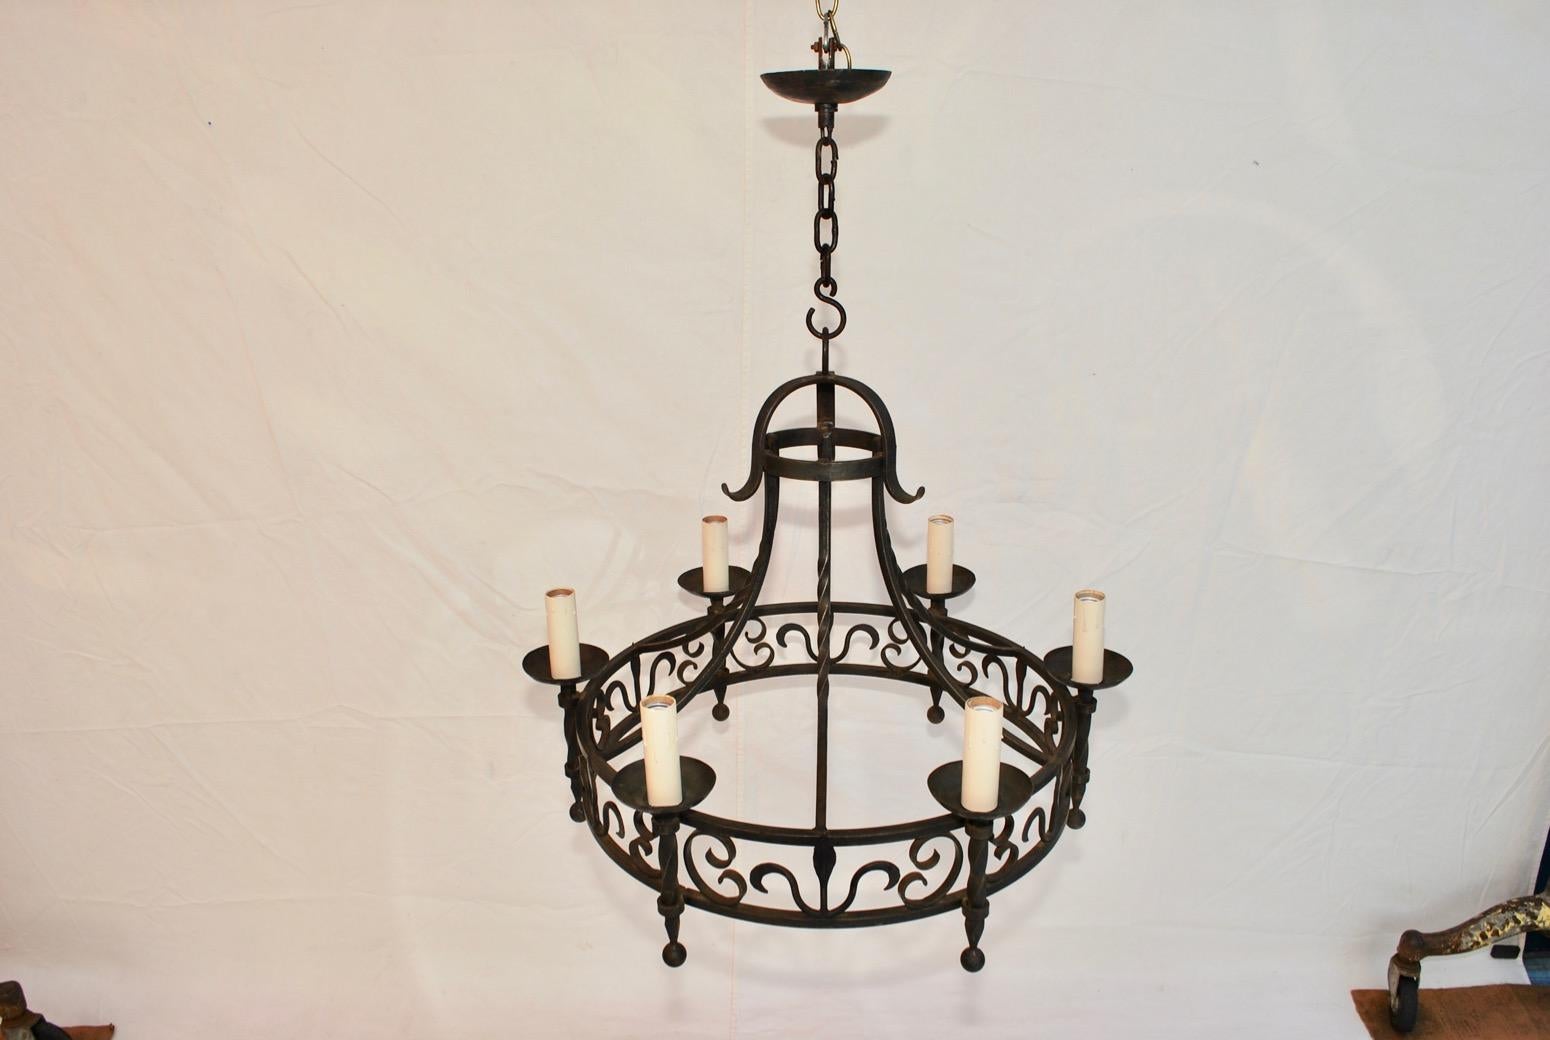 Spanish Colonial Elegant French, 1940s Wrought Iron Chandelier